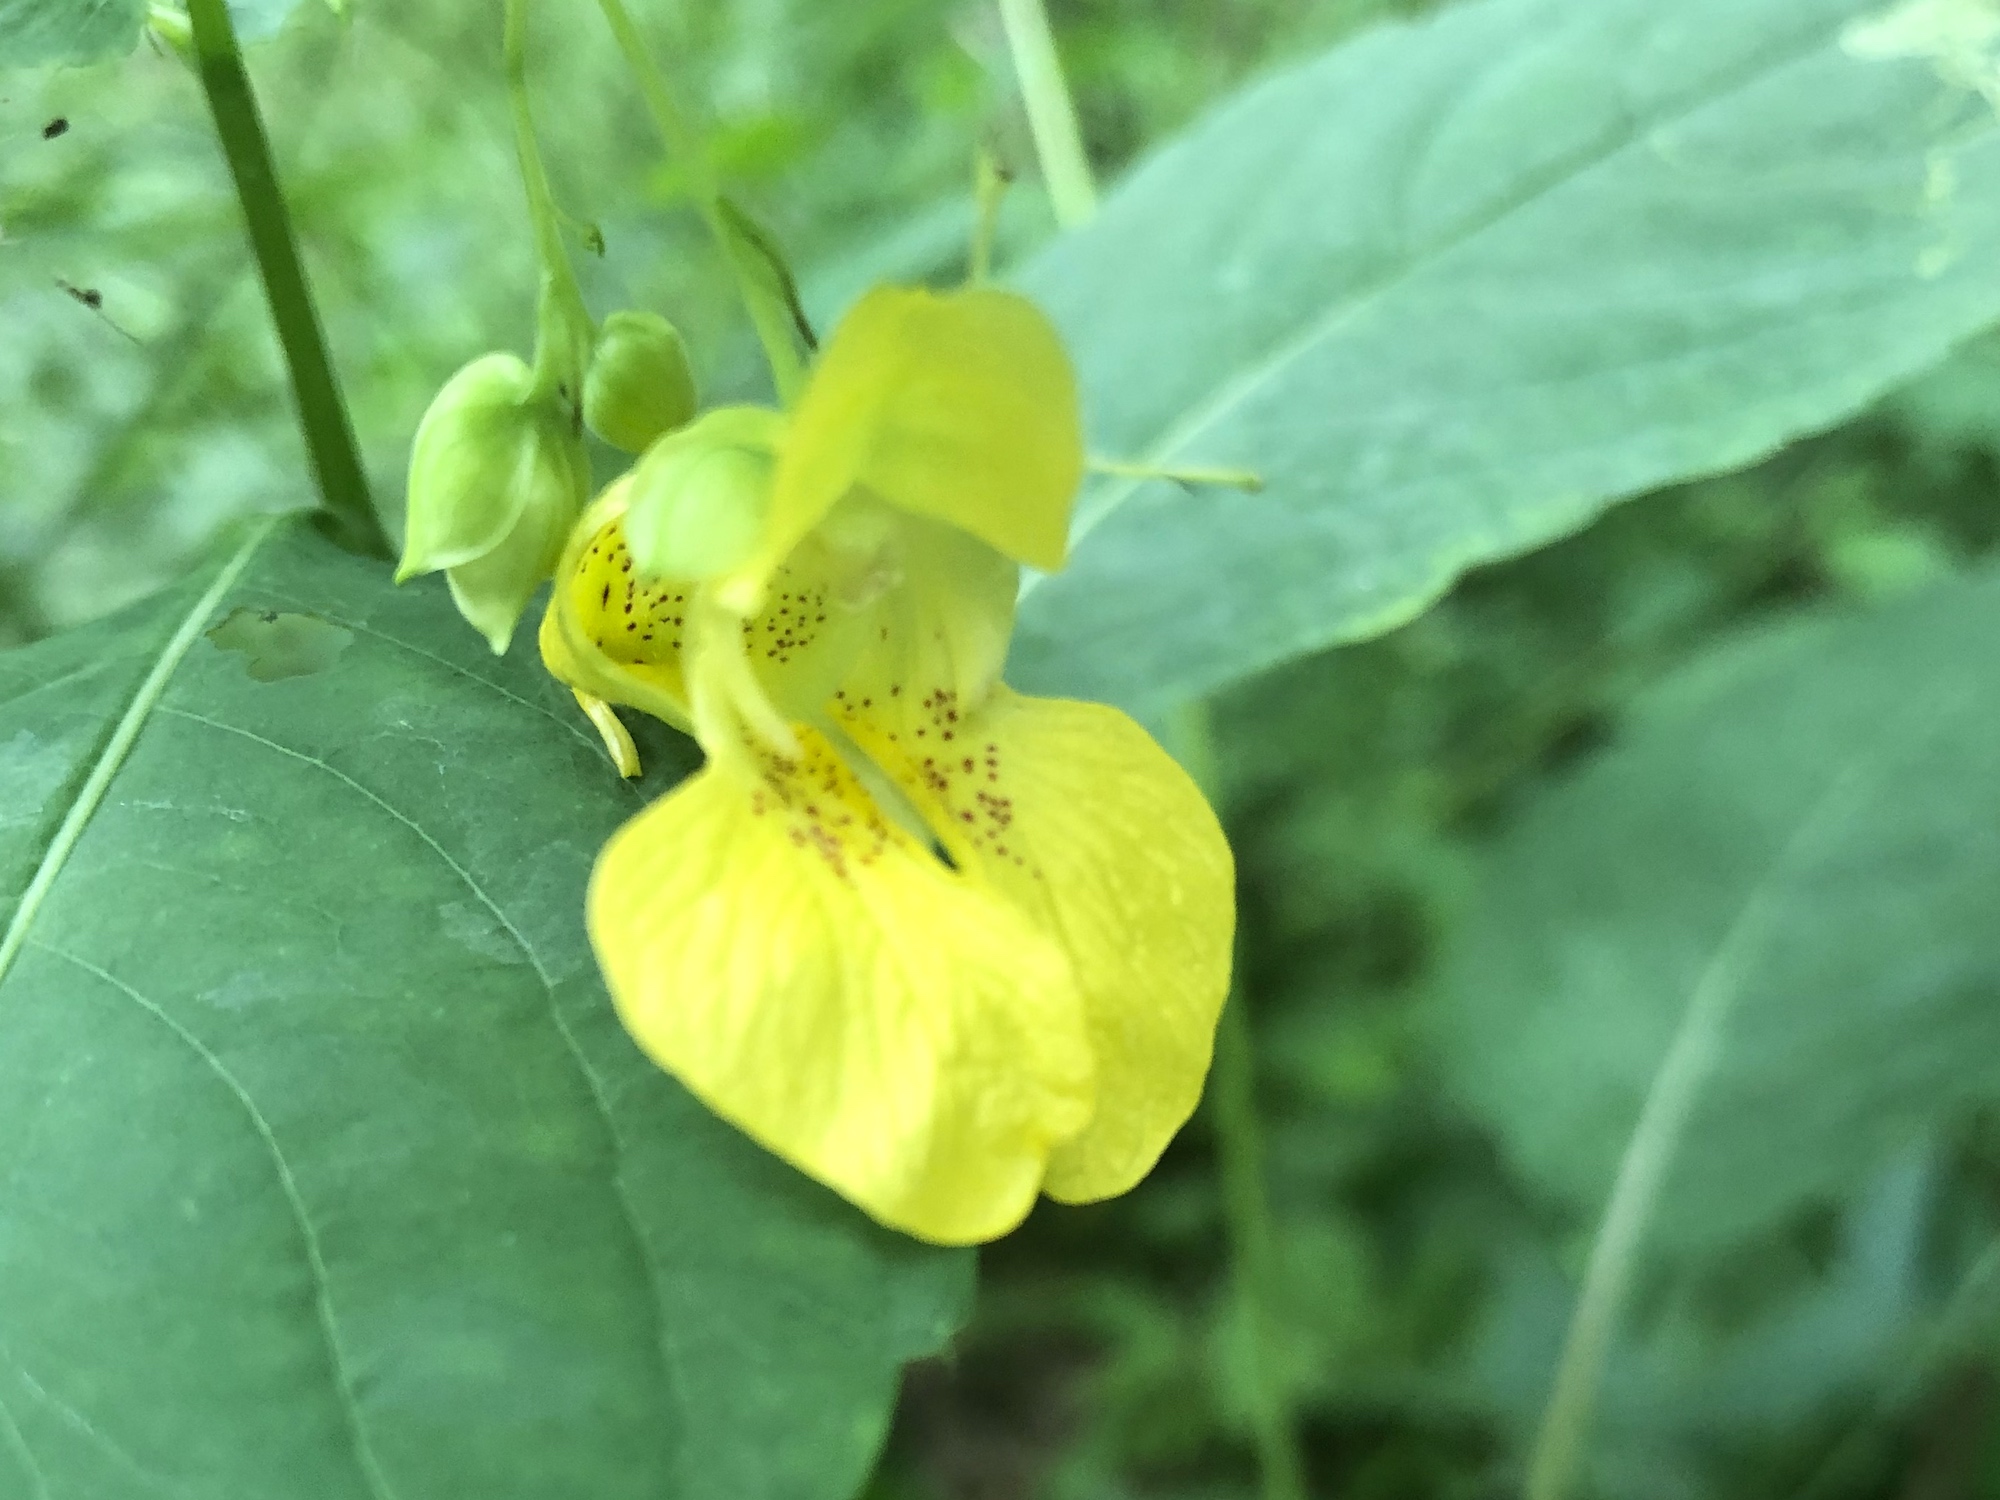 Yellow Jewelweed in woods along Pickford Street stormwater outflow (ends at Cattails) on June 26, 2019.